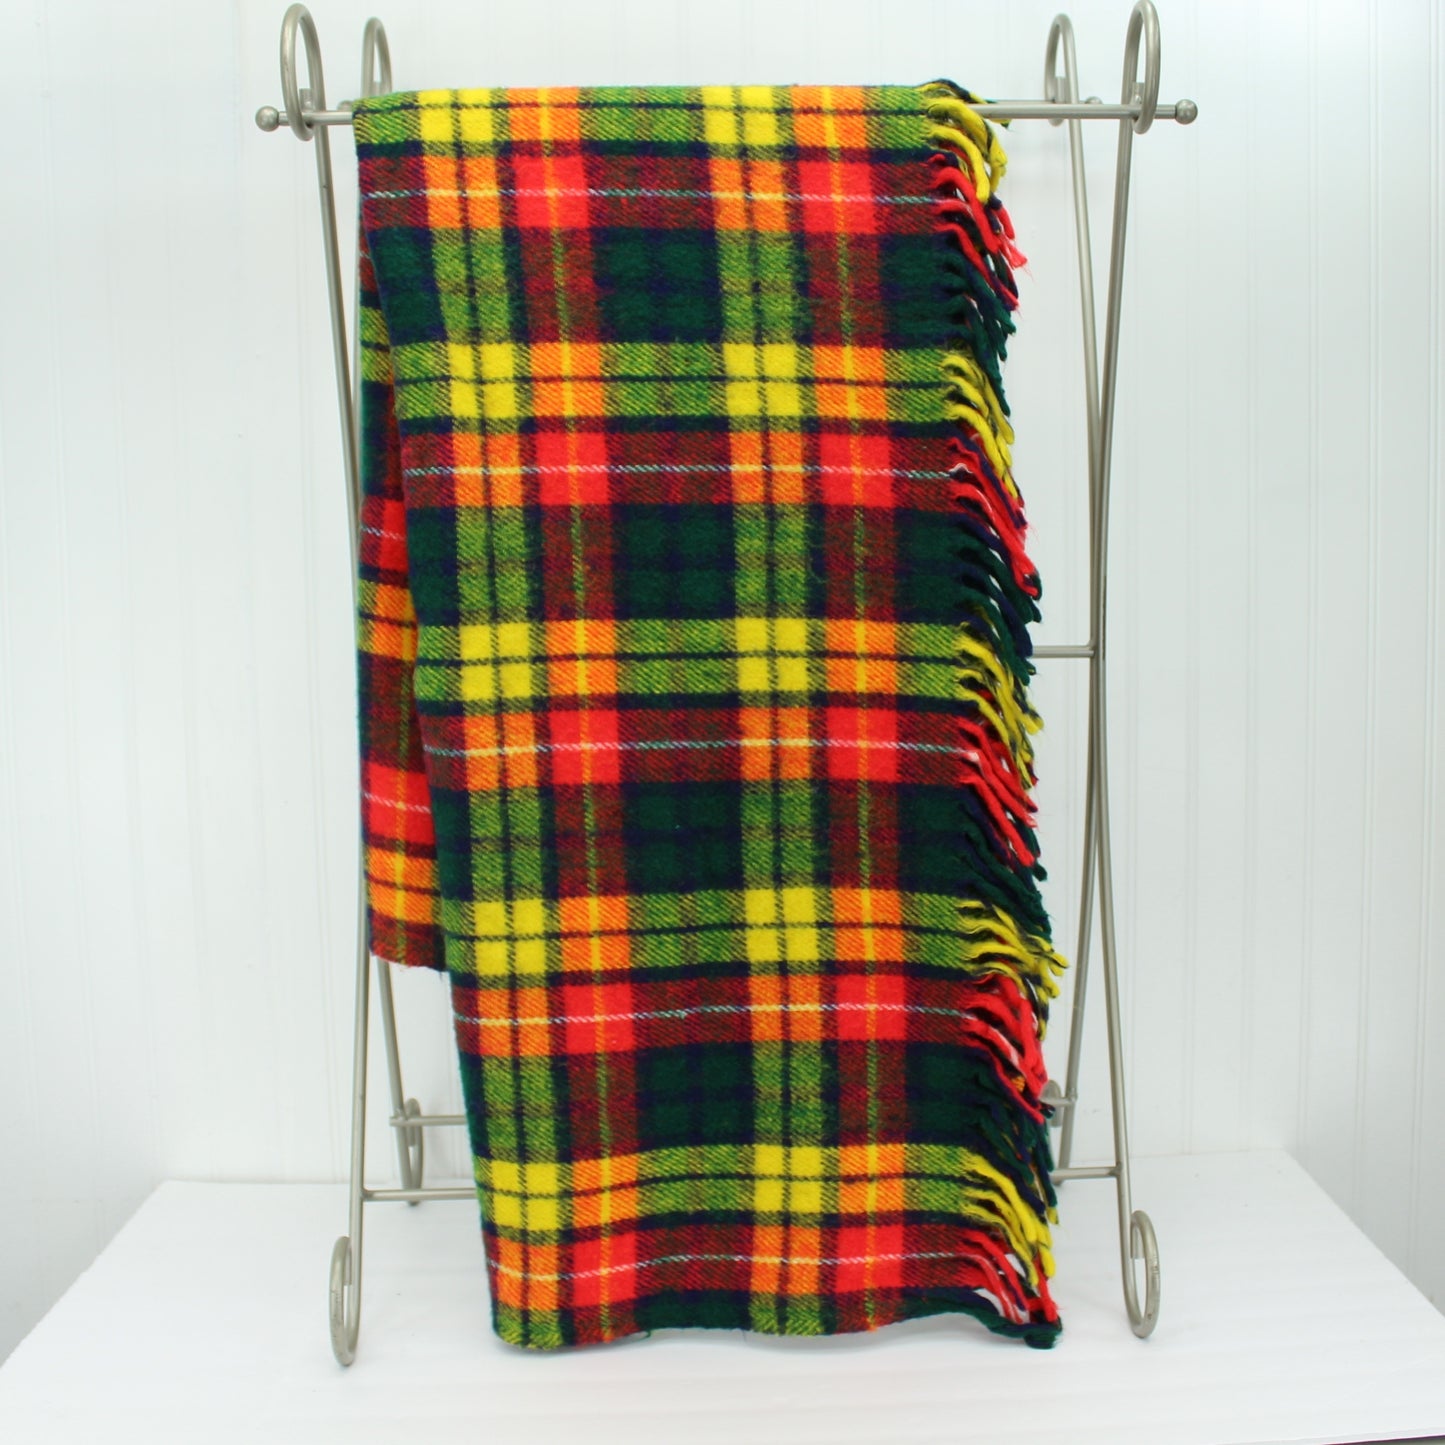 Faribo Classic Wool Throw Blanket Red  Green Yellow Plaid  54" by 52" USA vintage blanket 1970s